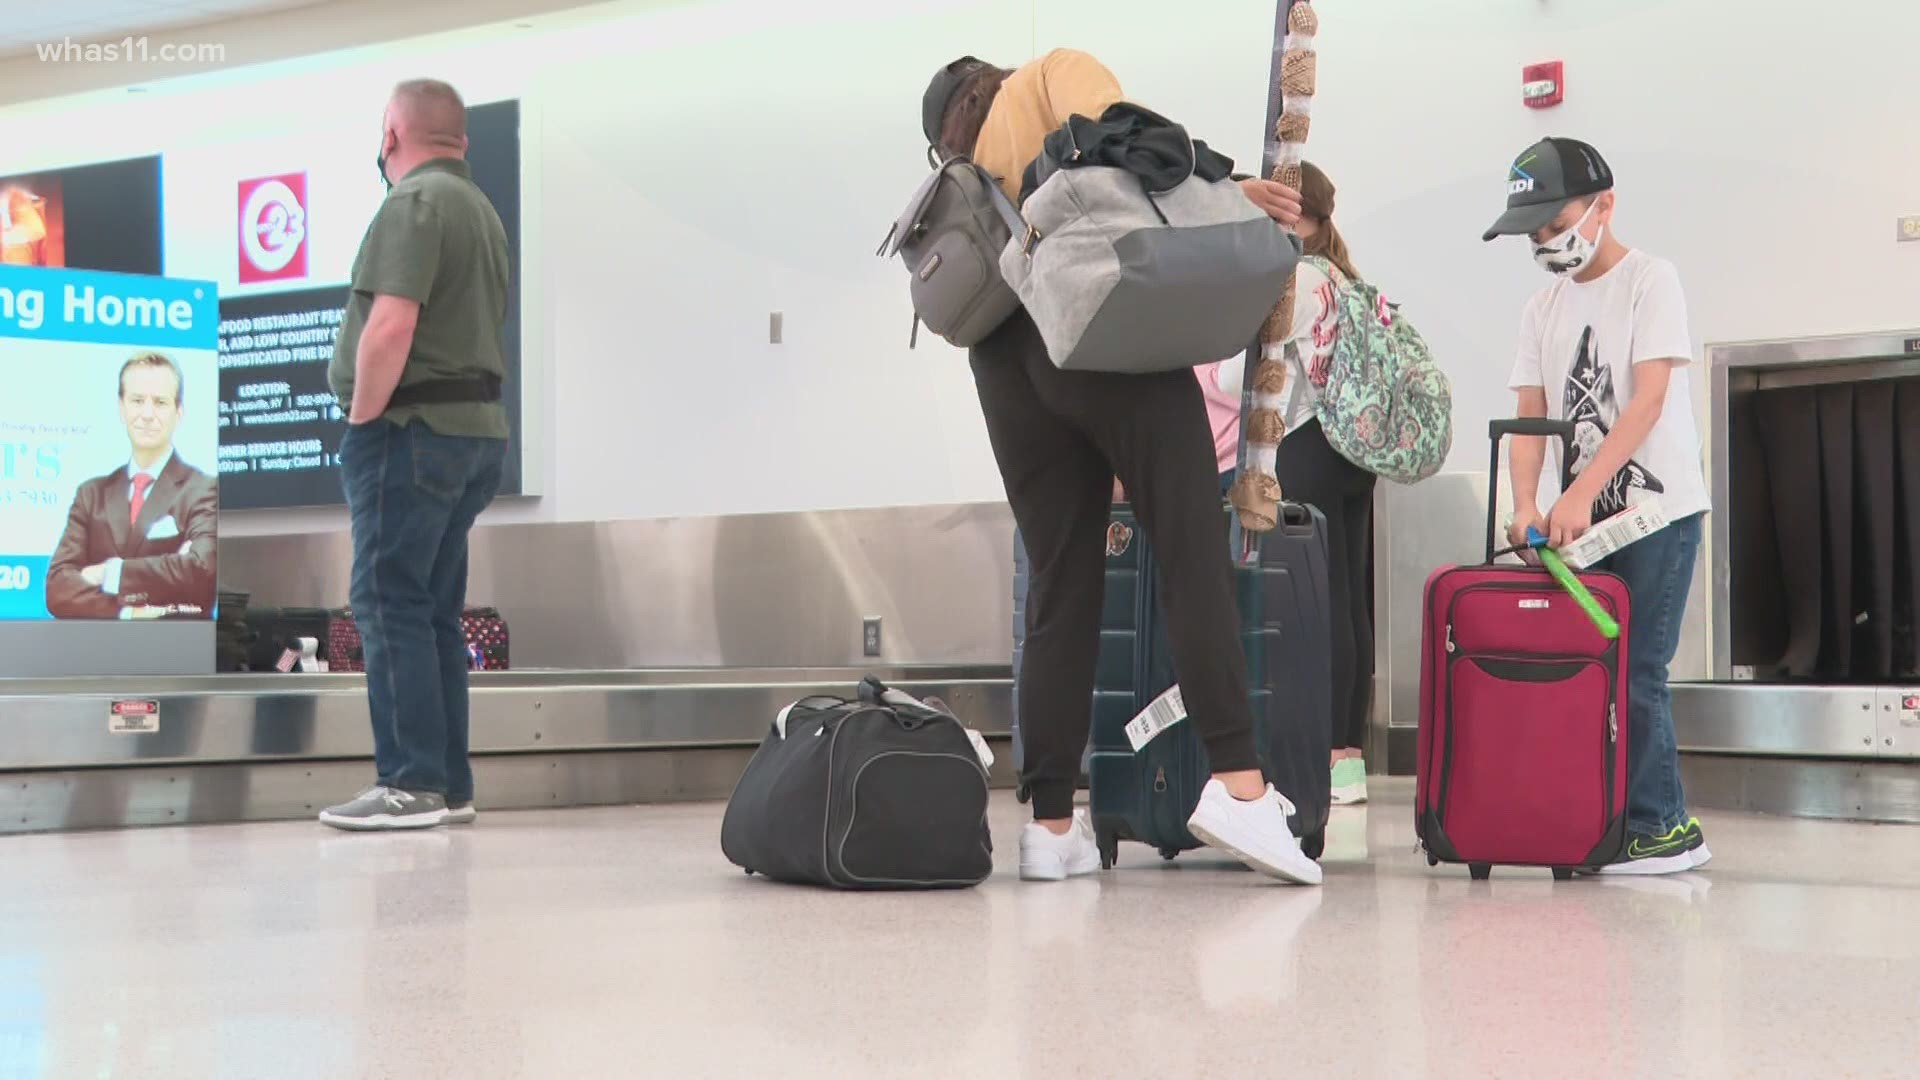 After a year of no travel, people are anxious to pick up where they left off. Now, the CDC is giving the all clear for takeoff to those that are full vaccinated.